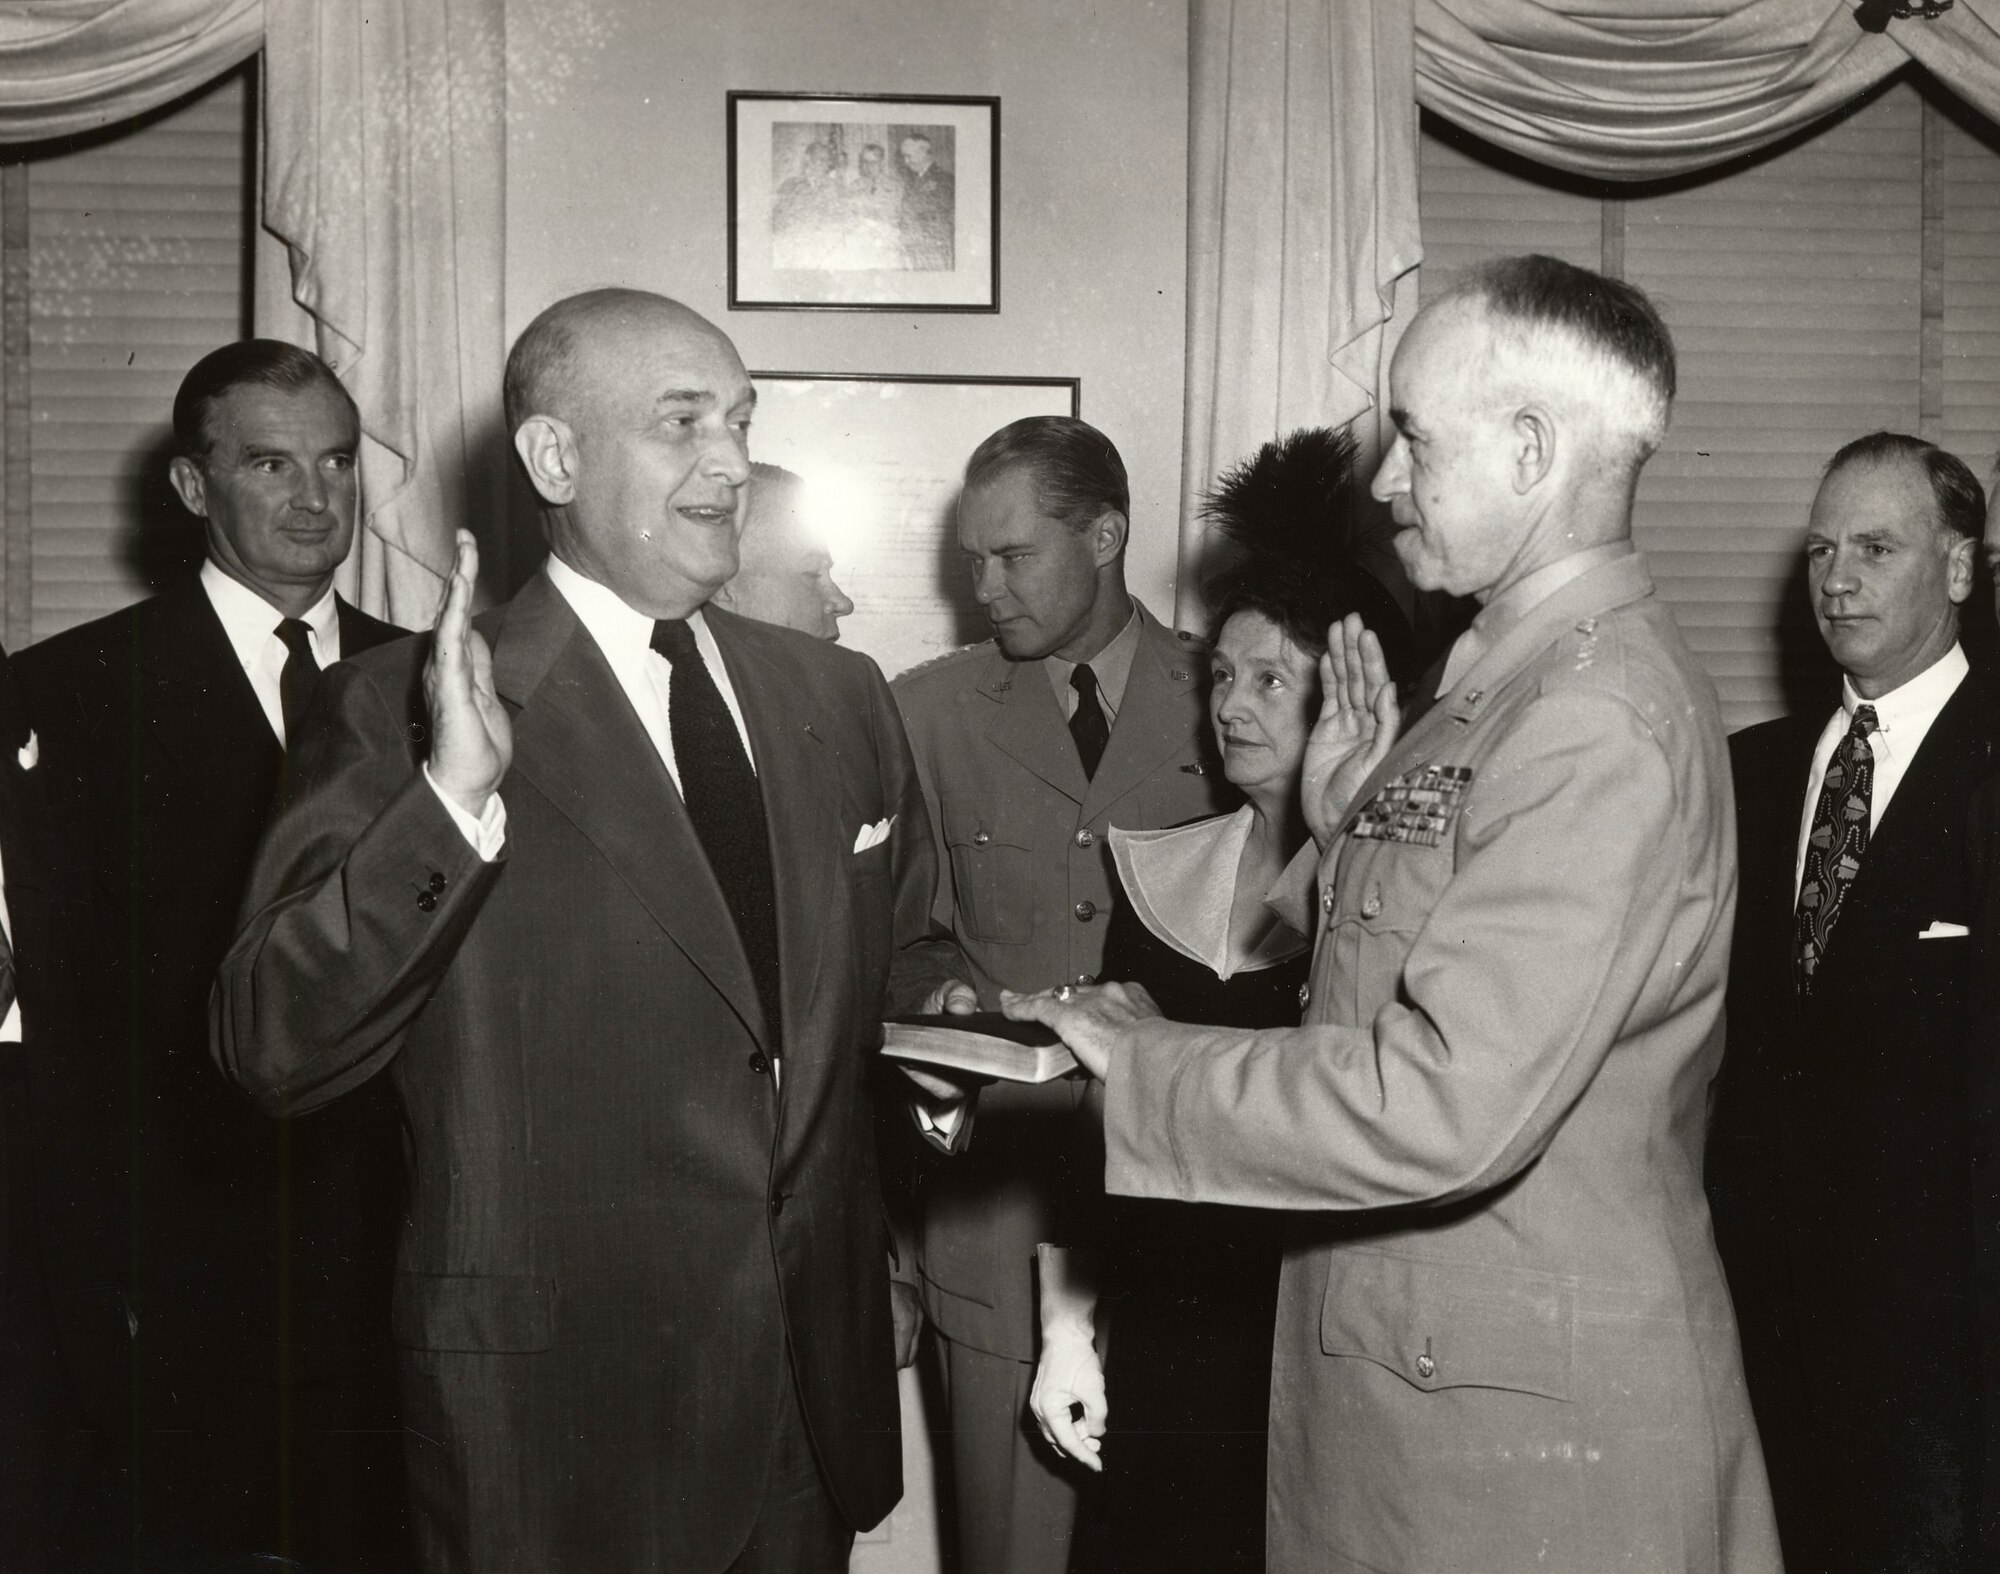 Secretary of Defense Louis Johnson swears in U.S. Army Gen. Omar Bradley as the first chairman of the Joint Chiefs of Staff during a ceremony in Washington, D.C., Aug. 16, 1949.